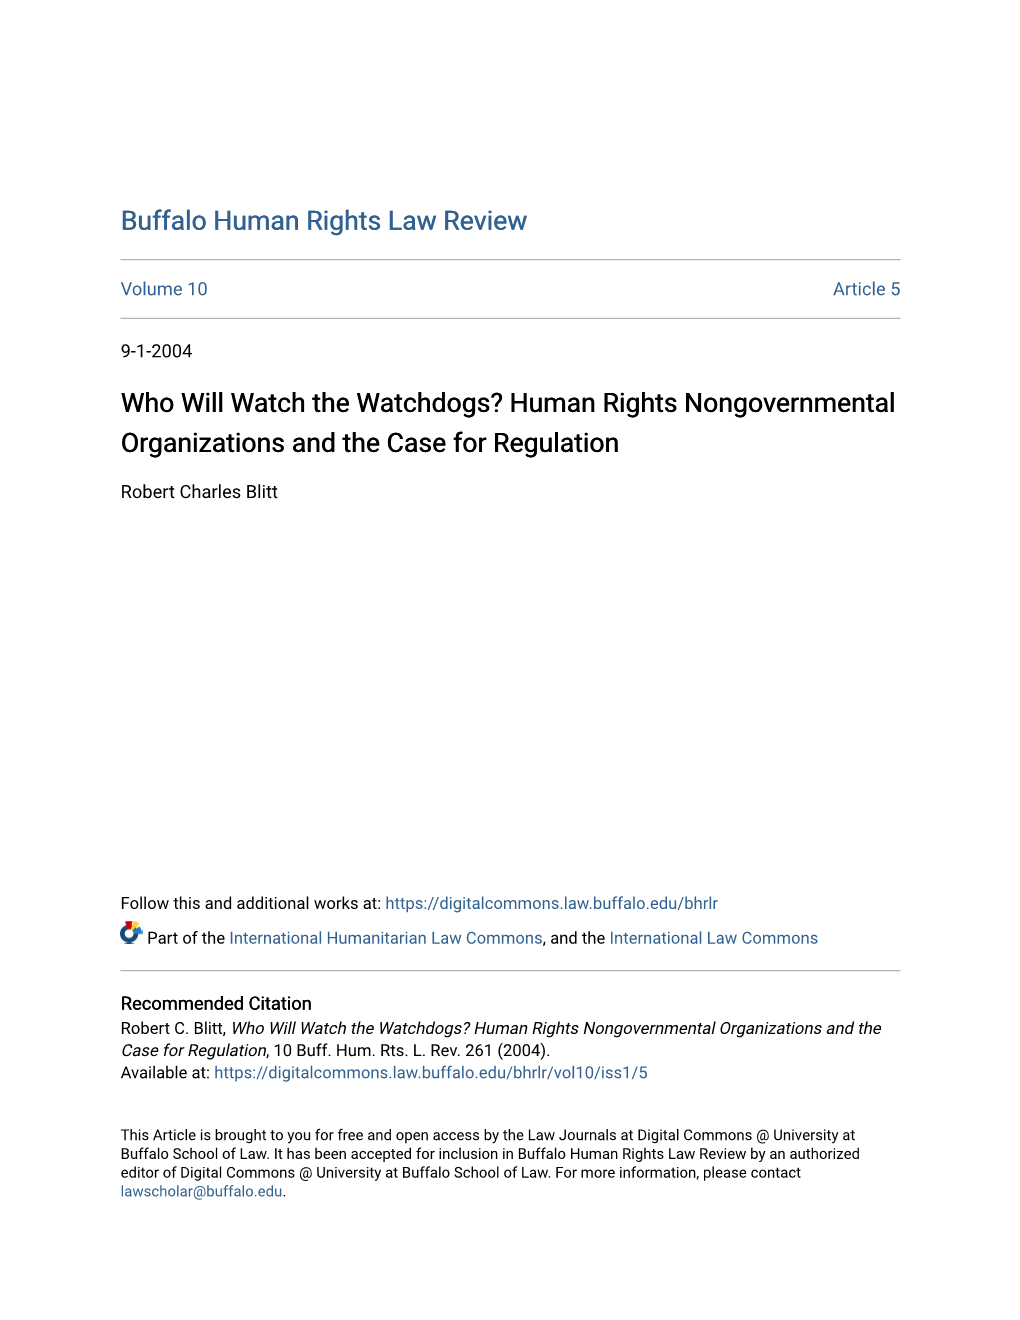 Who Will Watch the Watchdogs? Human Rights Nongovernmental Organizations and the Case for Regulation